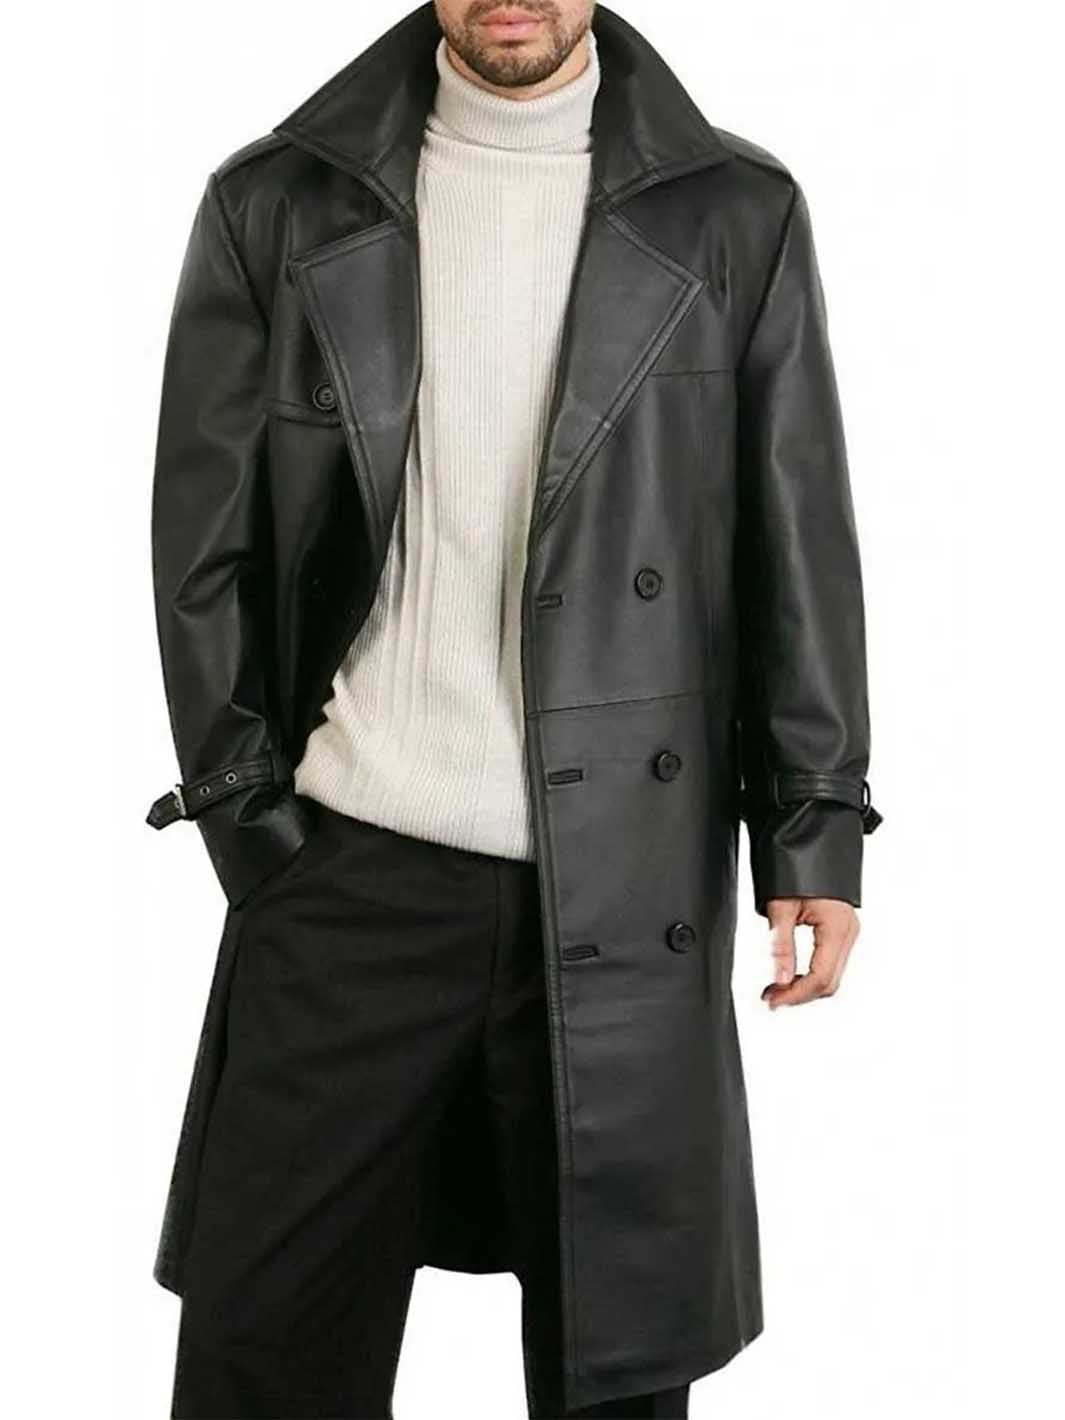 Men's Double Breasted Suede Leather Coat